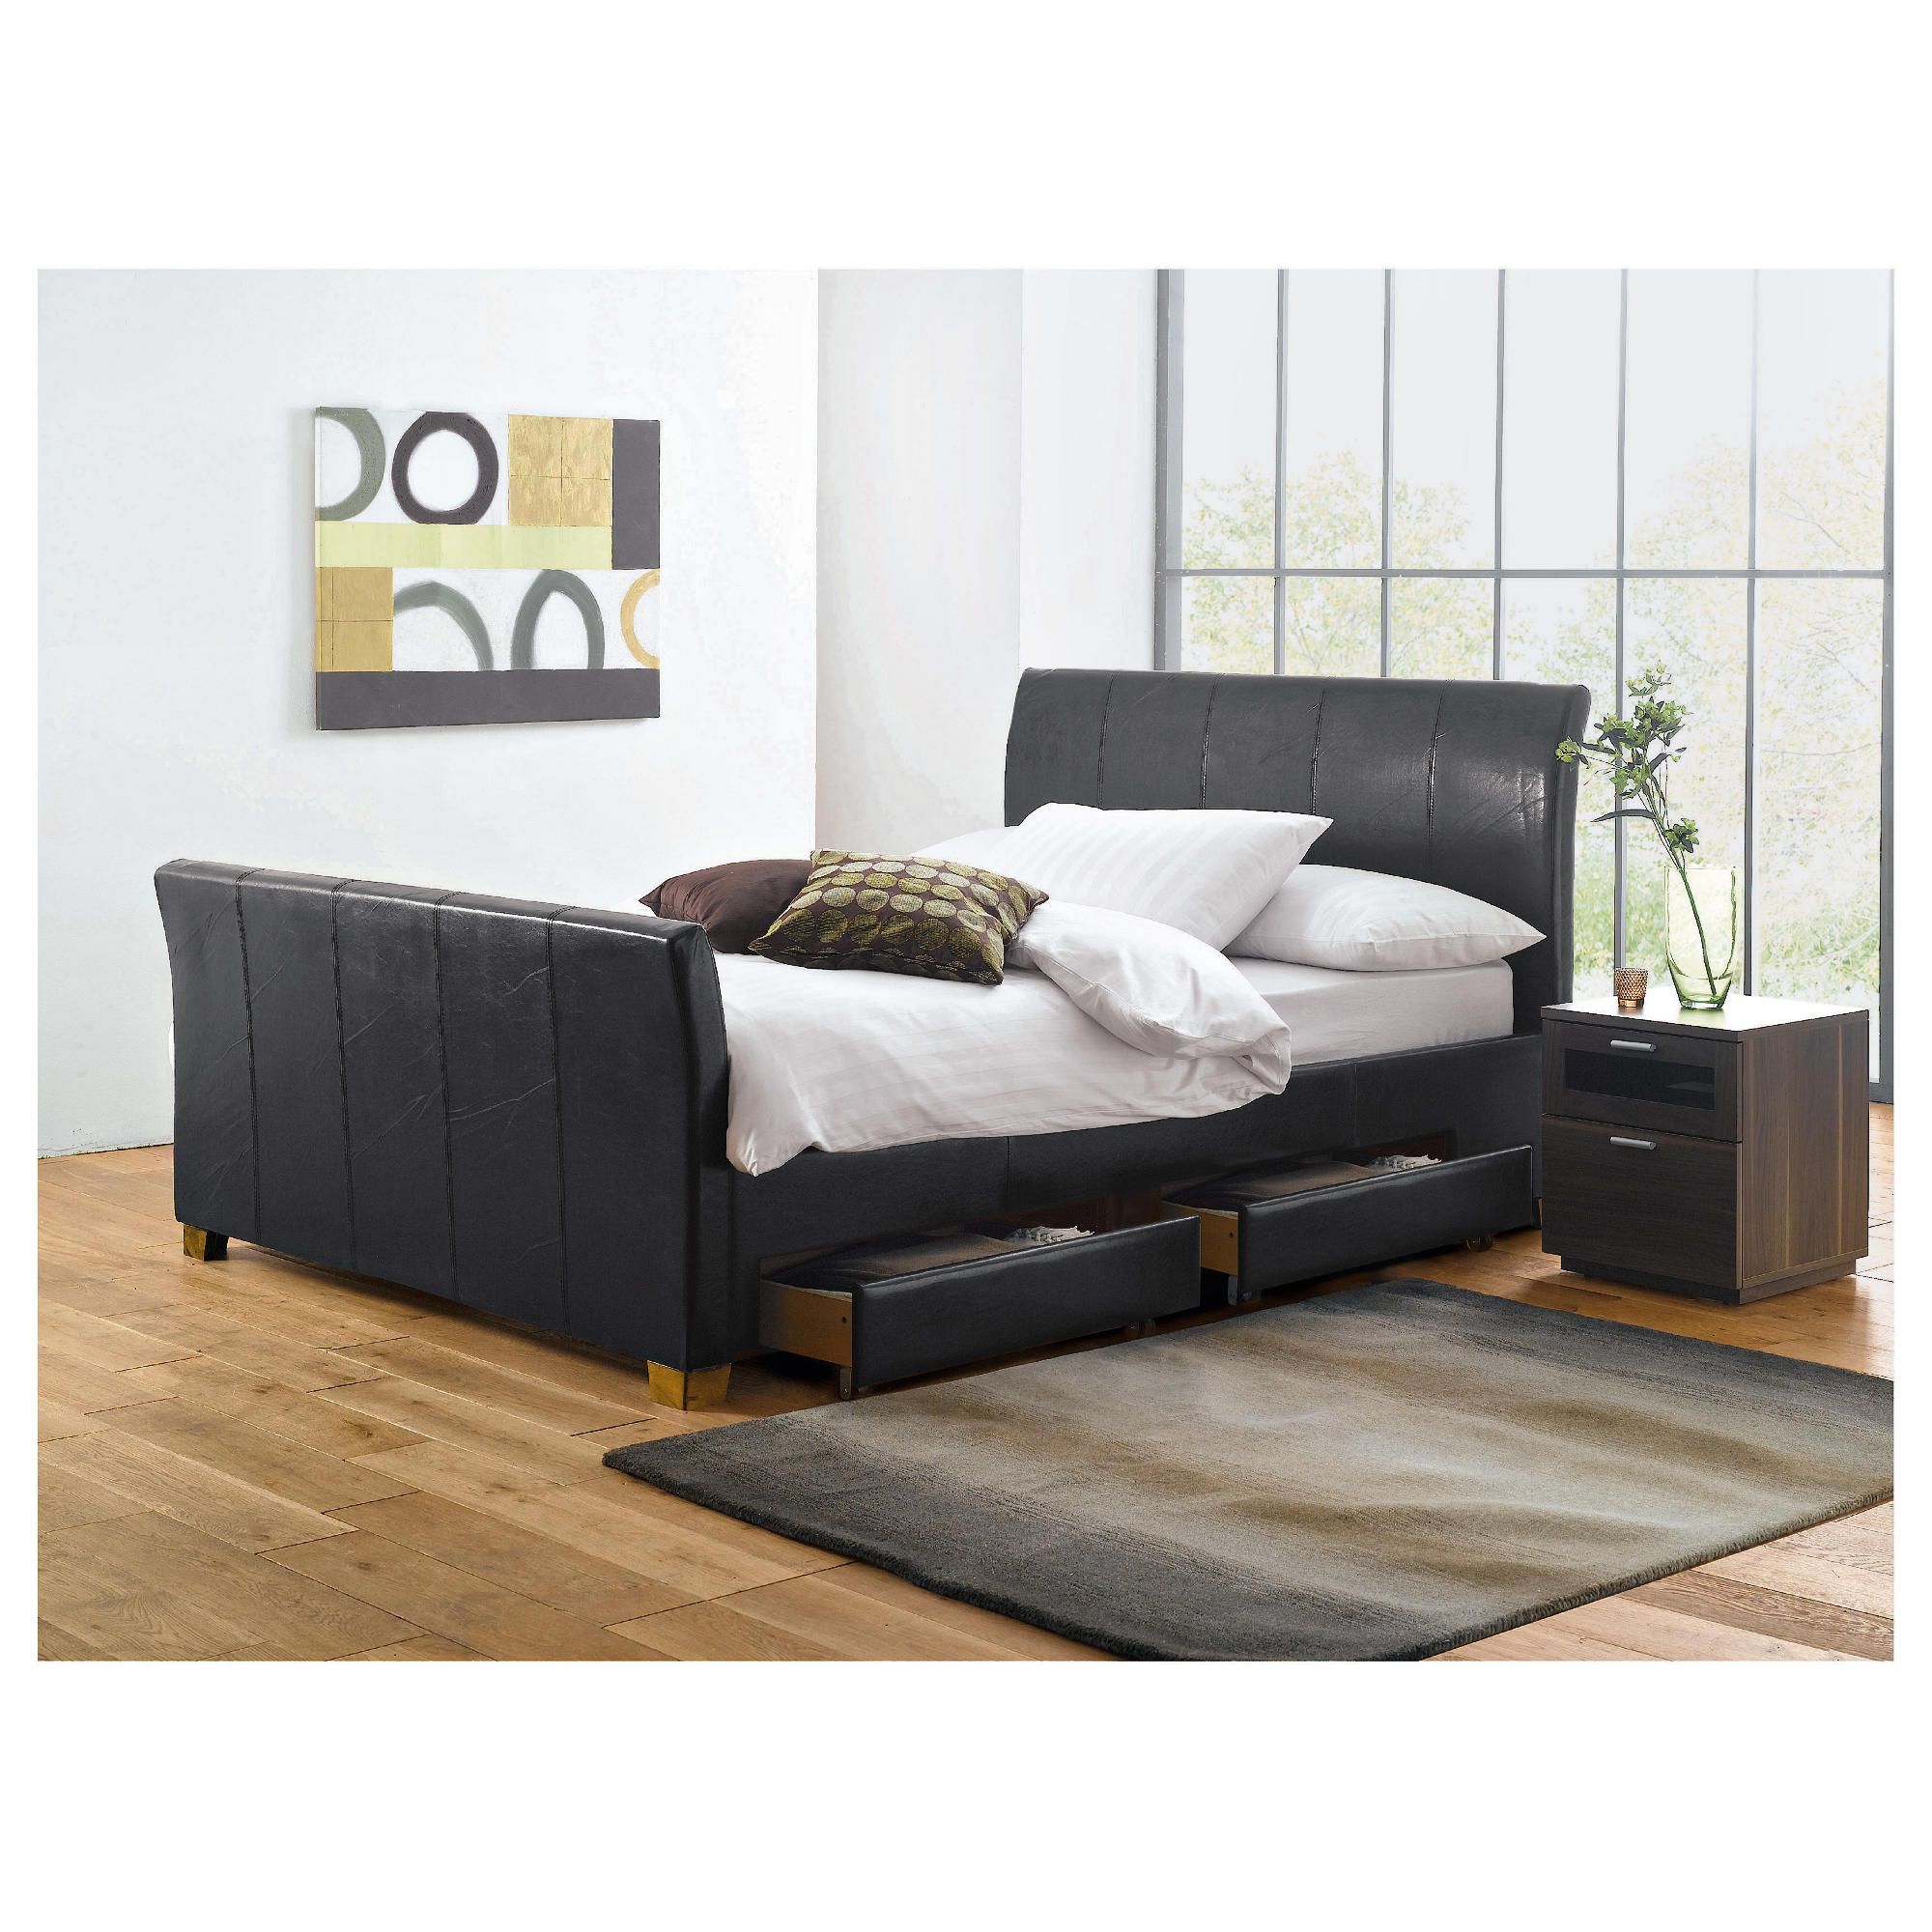 Rayne King Faux Leather Bed Frame with 4 Drawers, Black at Tesco Direct